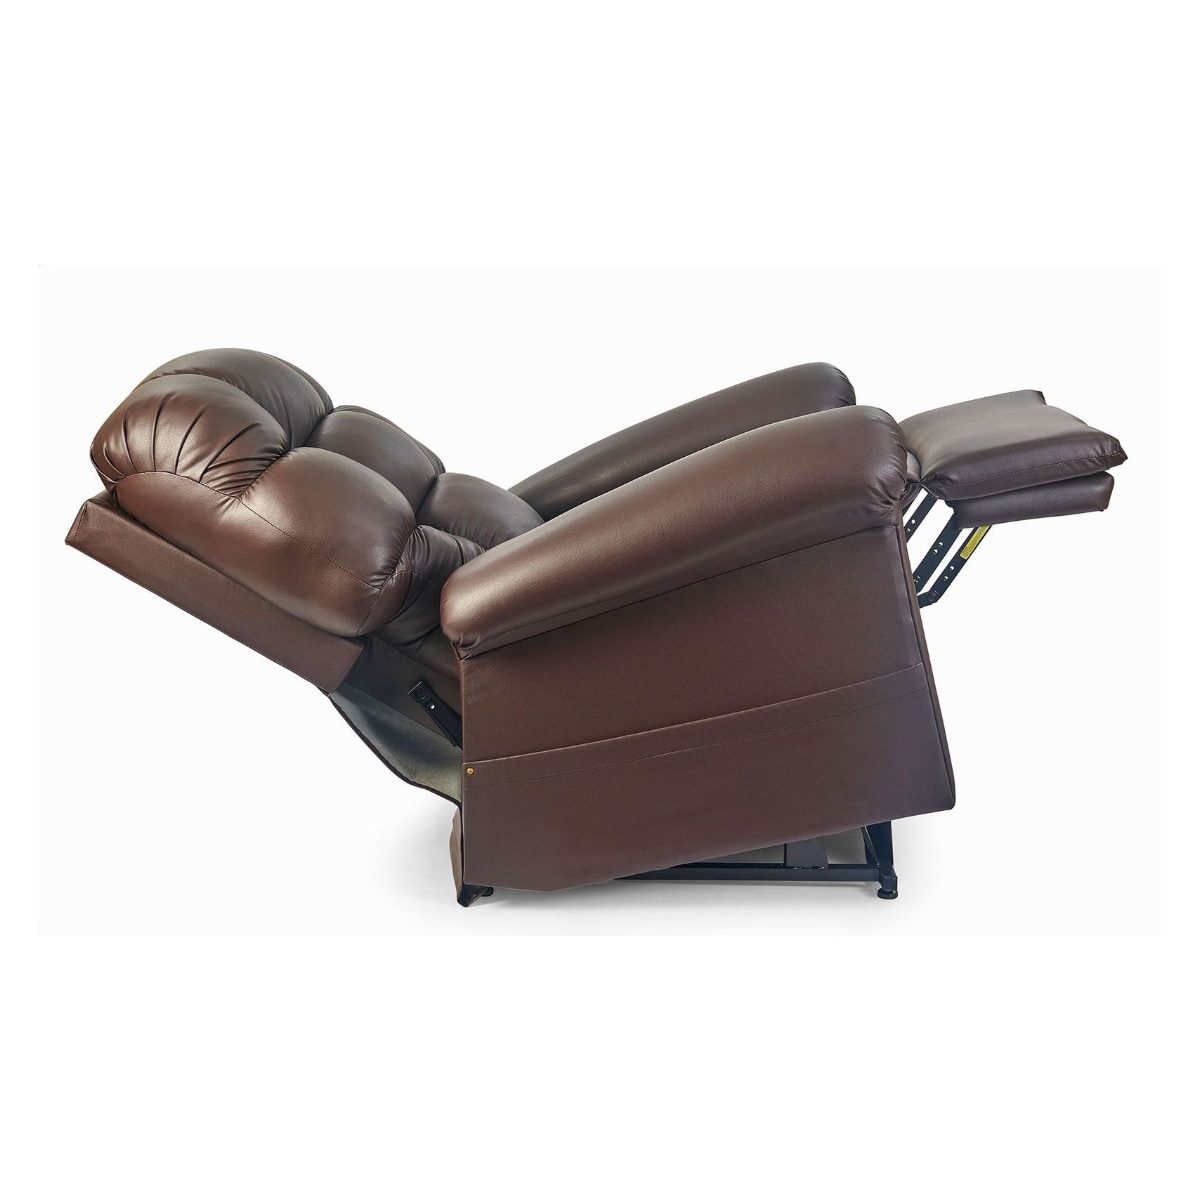 Golden MaxiComfort Cloud lift recliner in dark brown leather fabric in reclined position